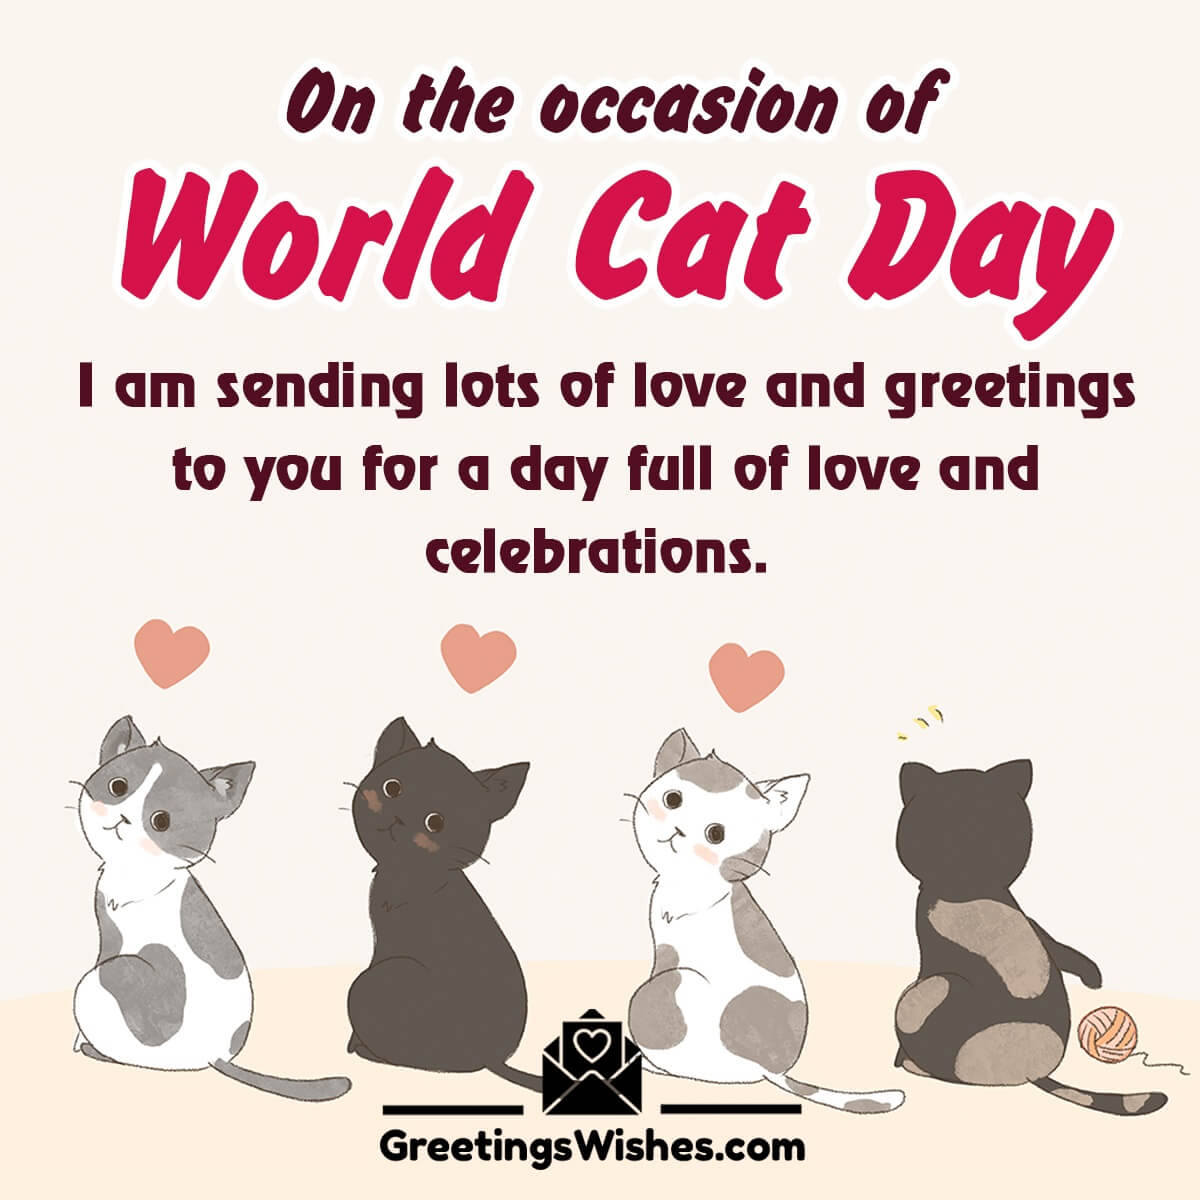 World Cat Day Greetings